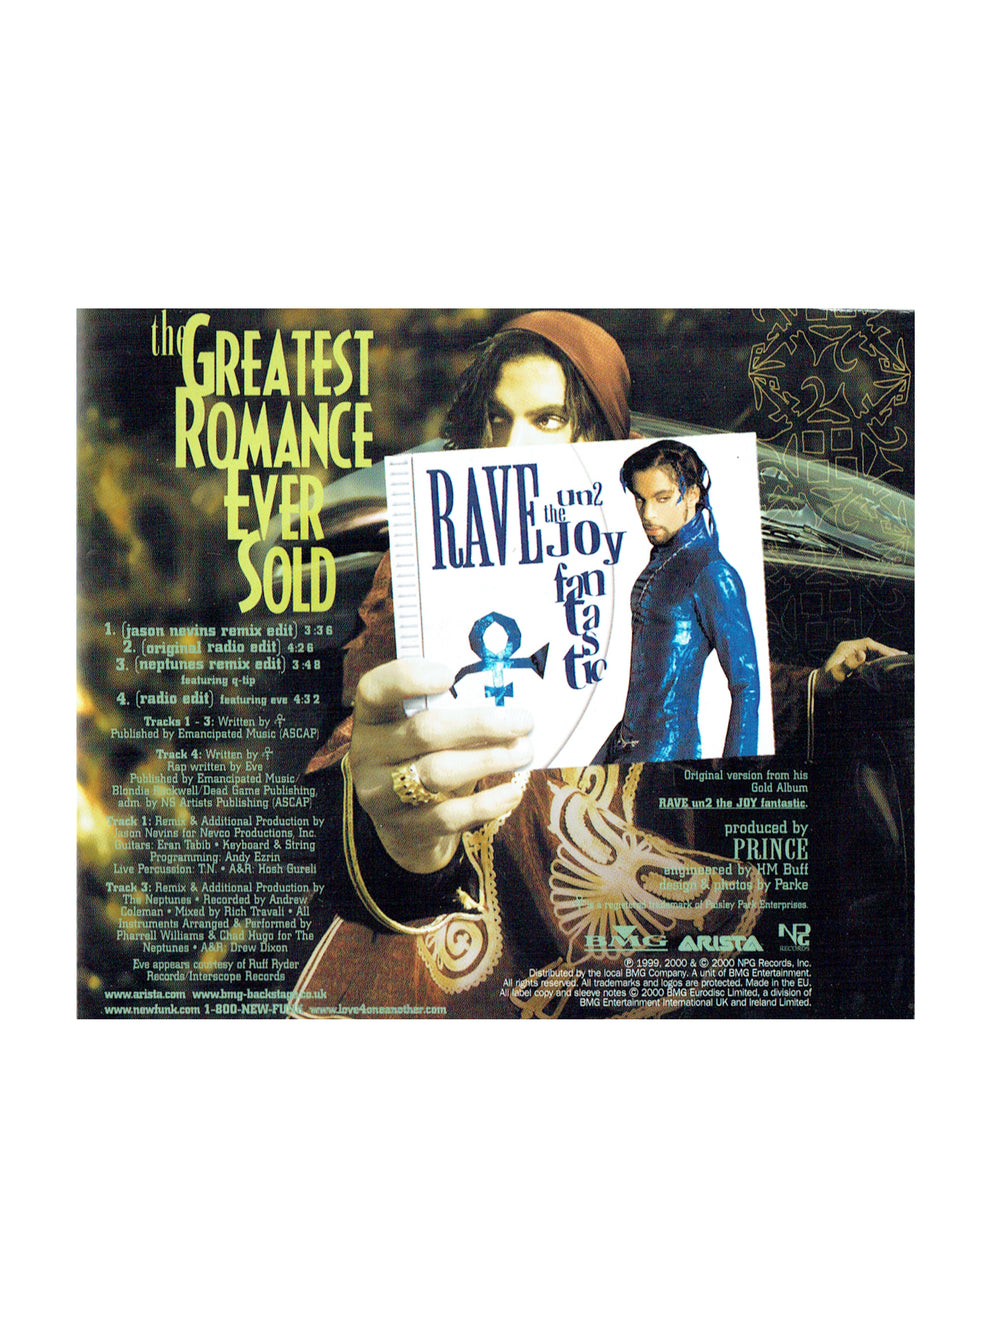 Prince The Greatest Romance Ever Sold CD Single 4 Tracks